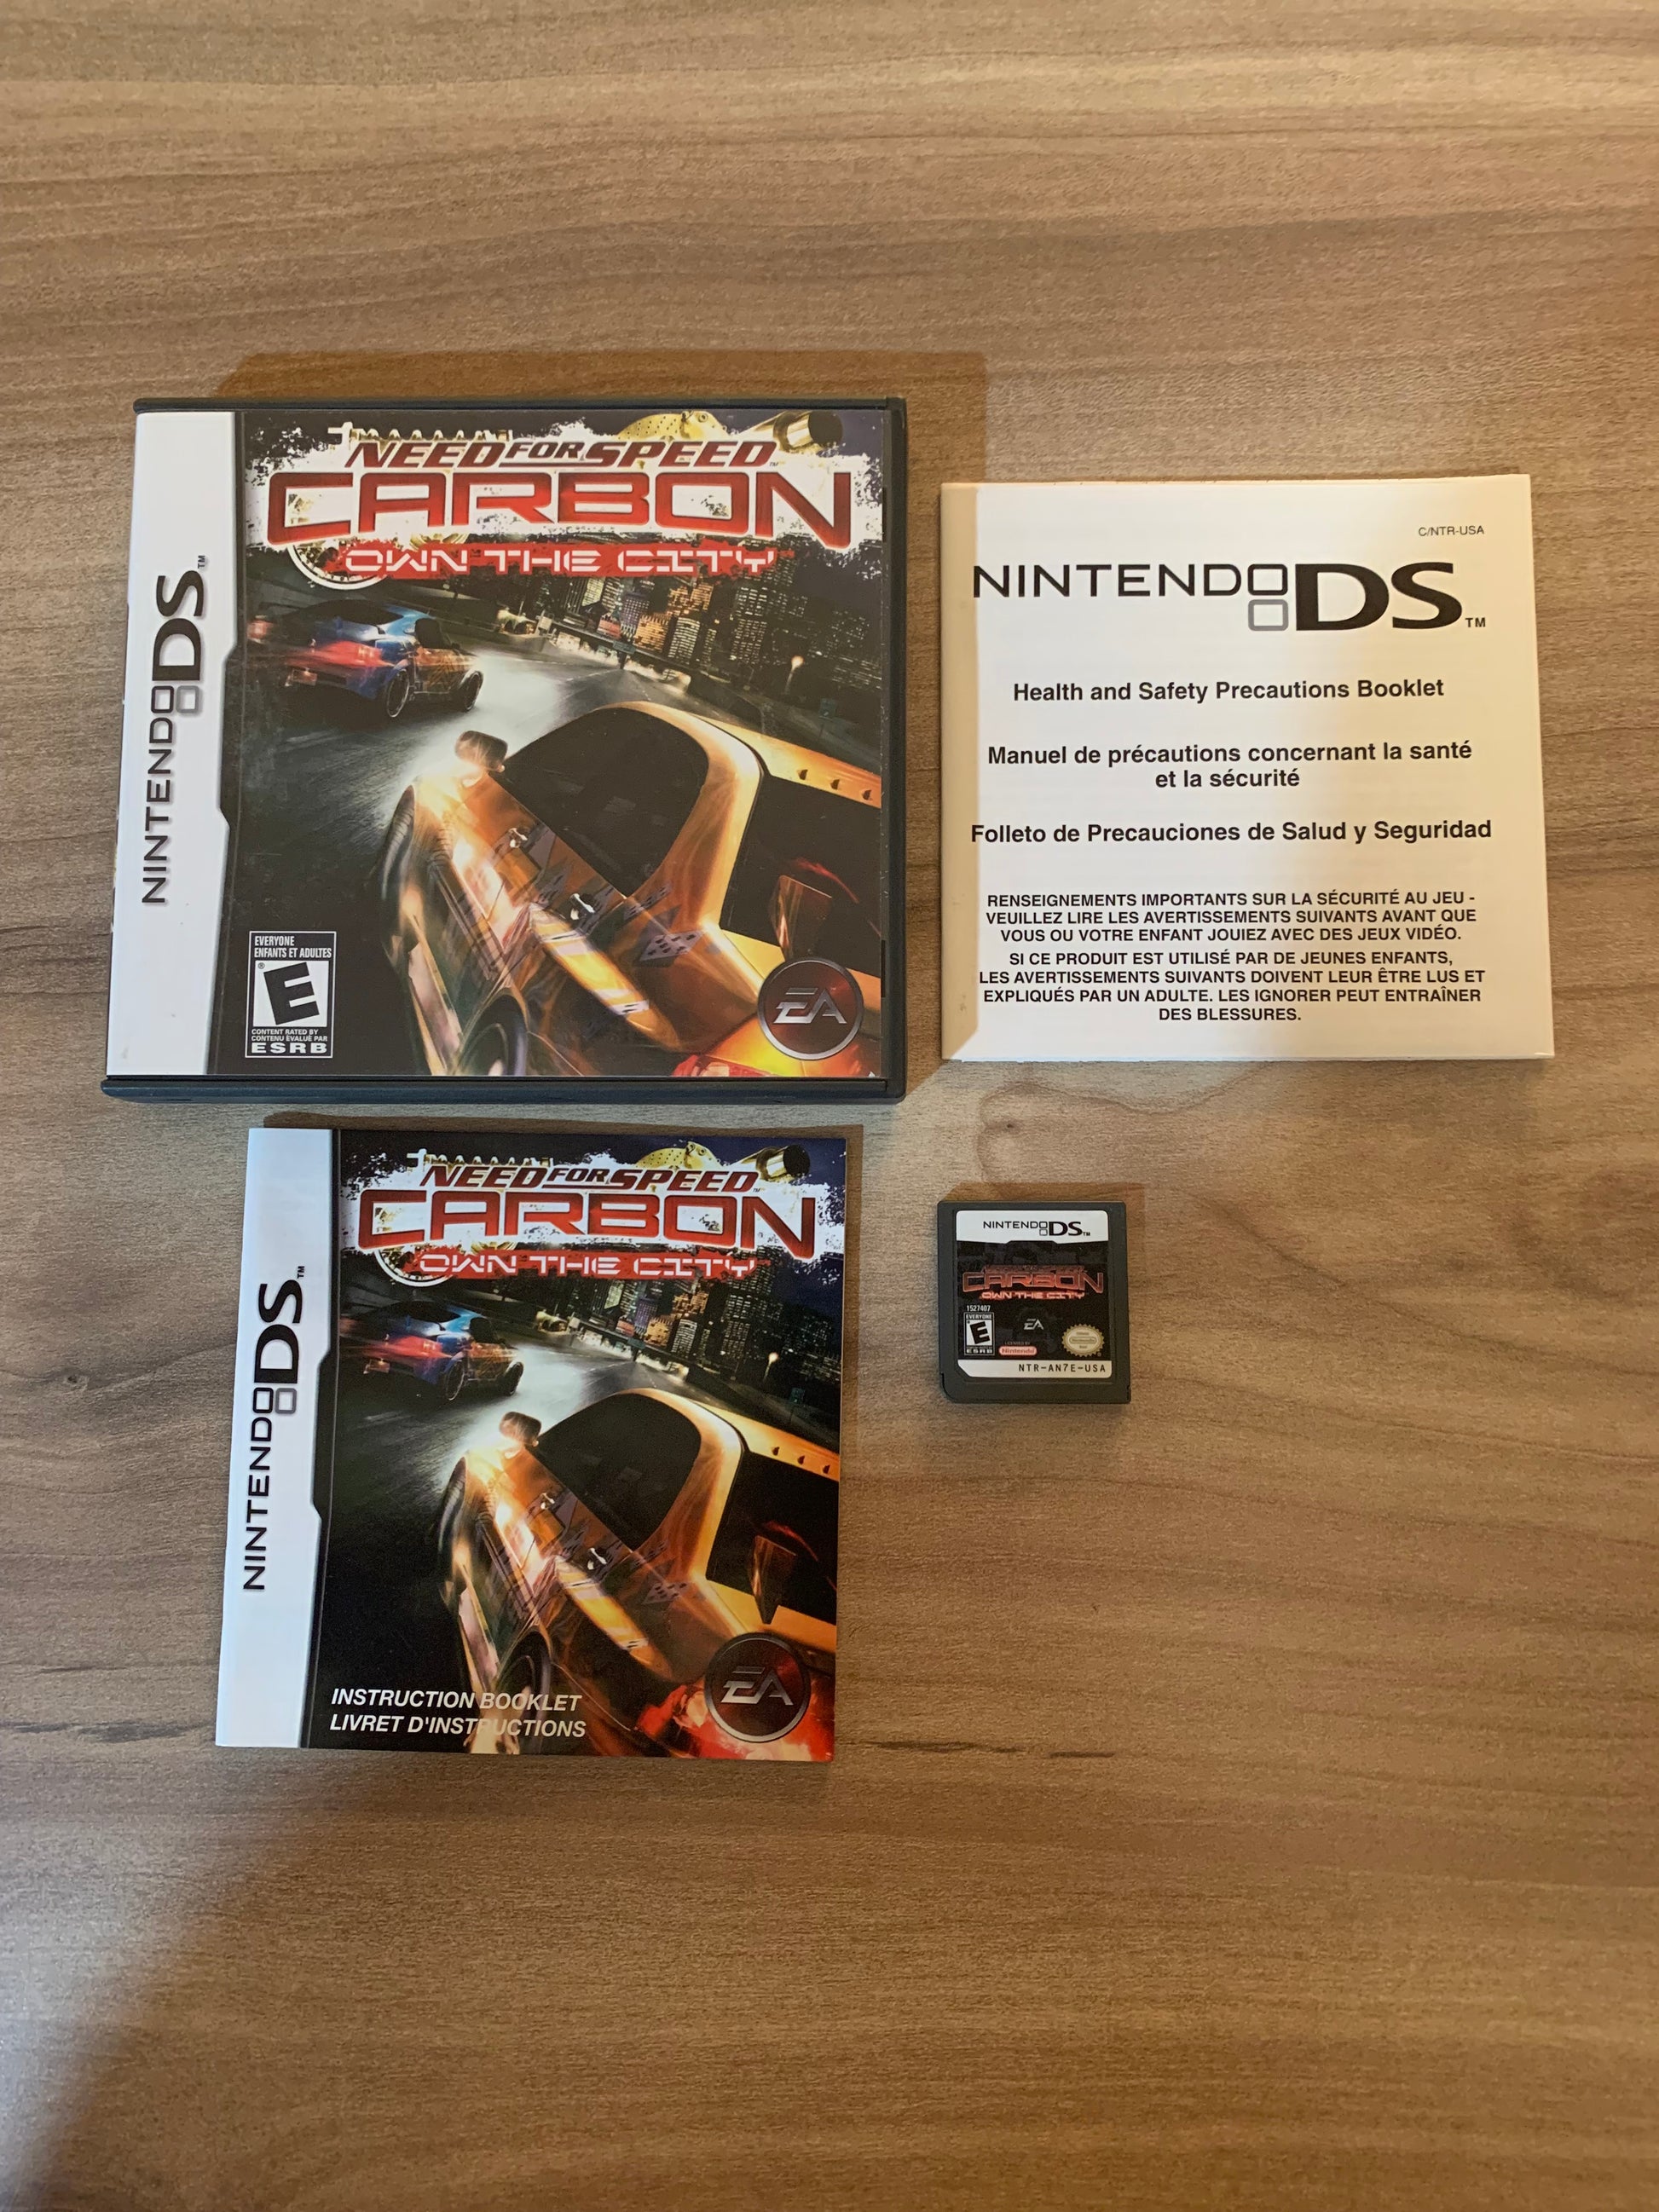 PiXEL-RETRO.COM : NINTENDO DS (DS) COMPLETE CIB BOX MANUAL GAME NTSC NEED FOR SPEED CARBON OWN THE CITY